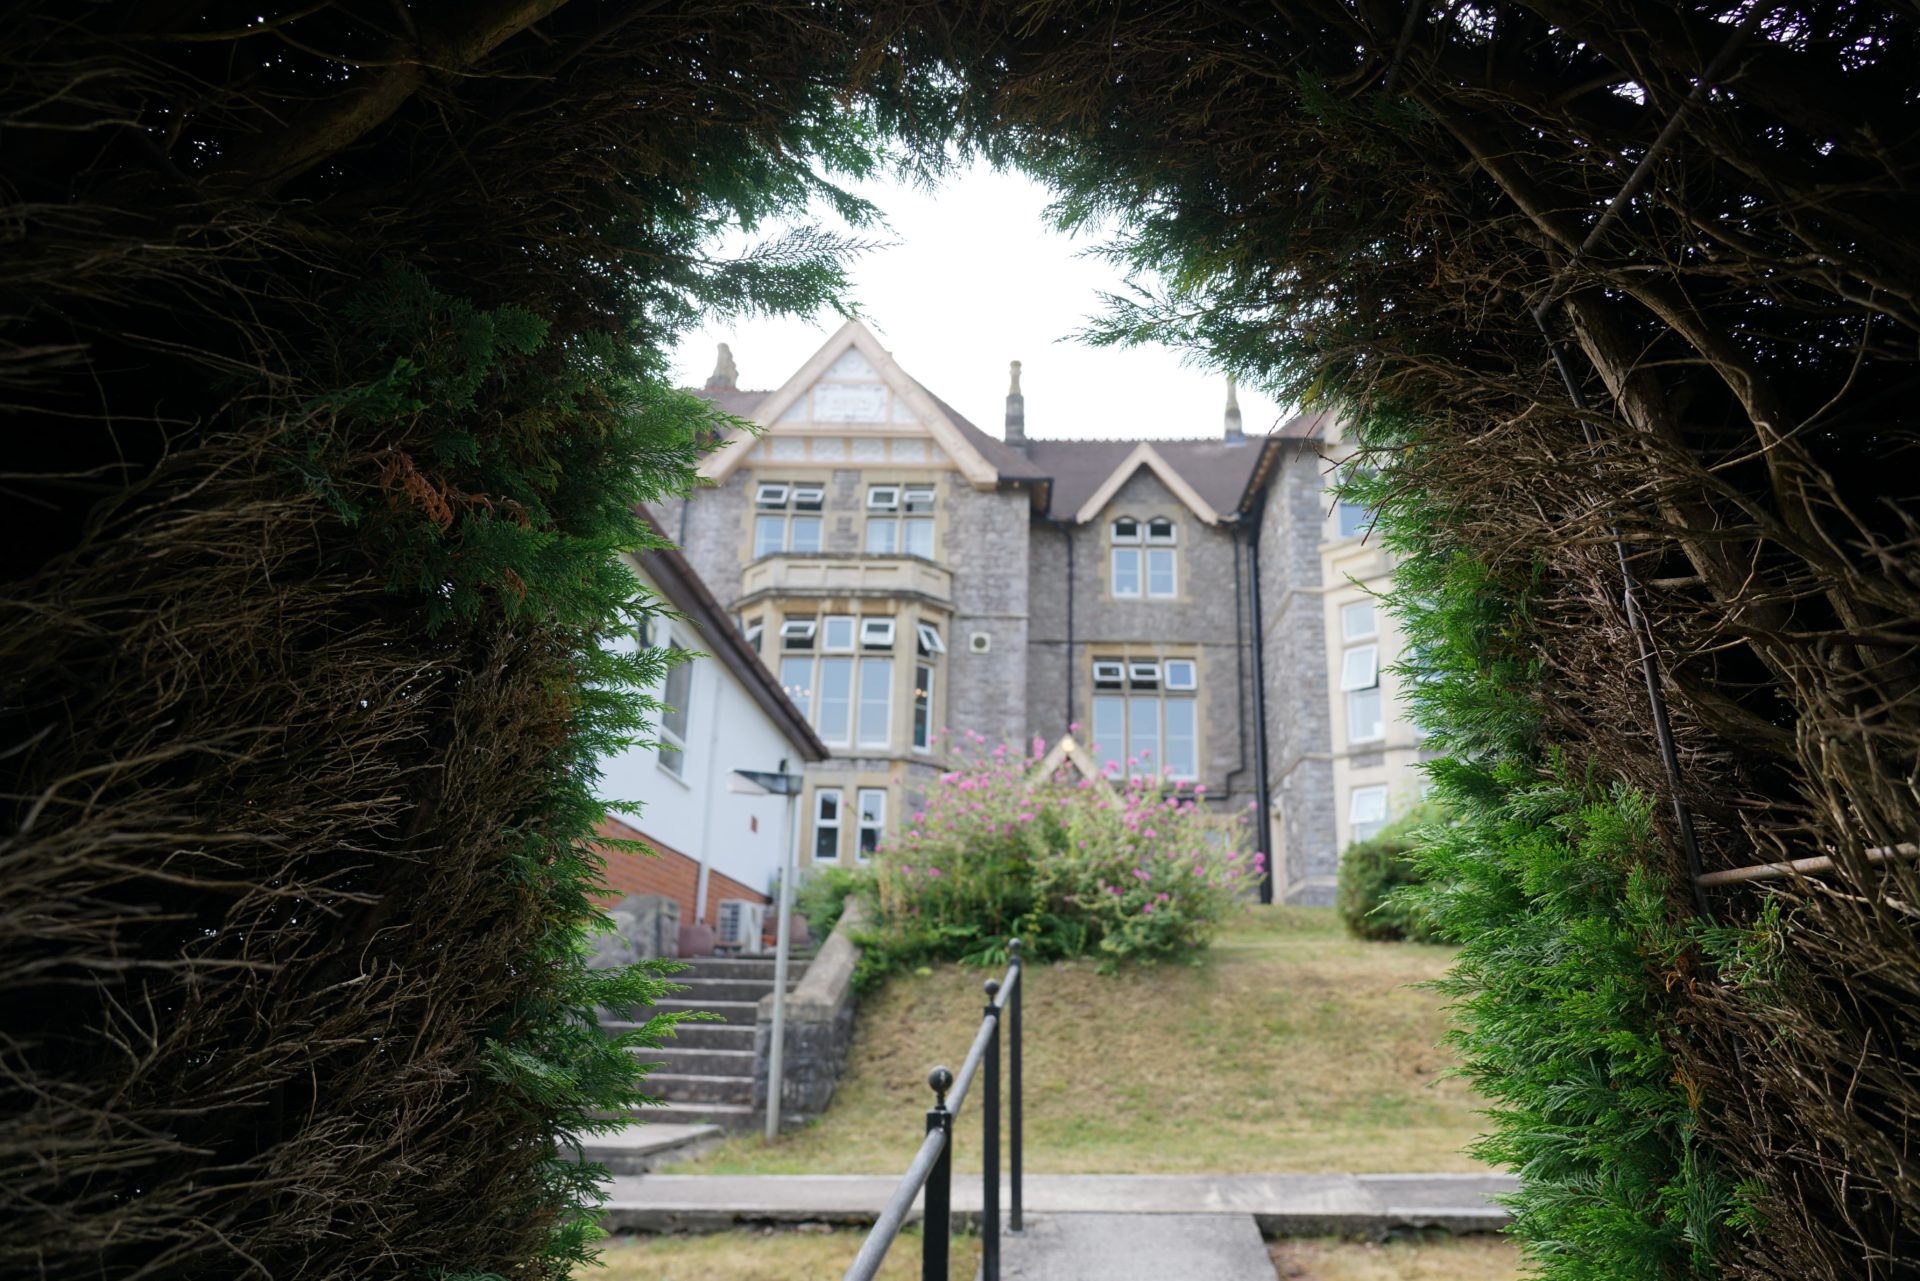 View of Broadway Lodge from arch in the garden